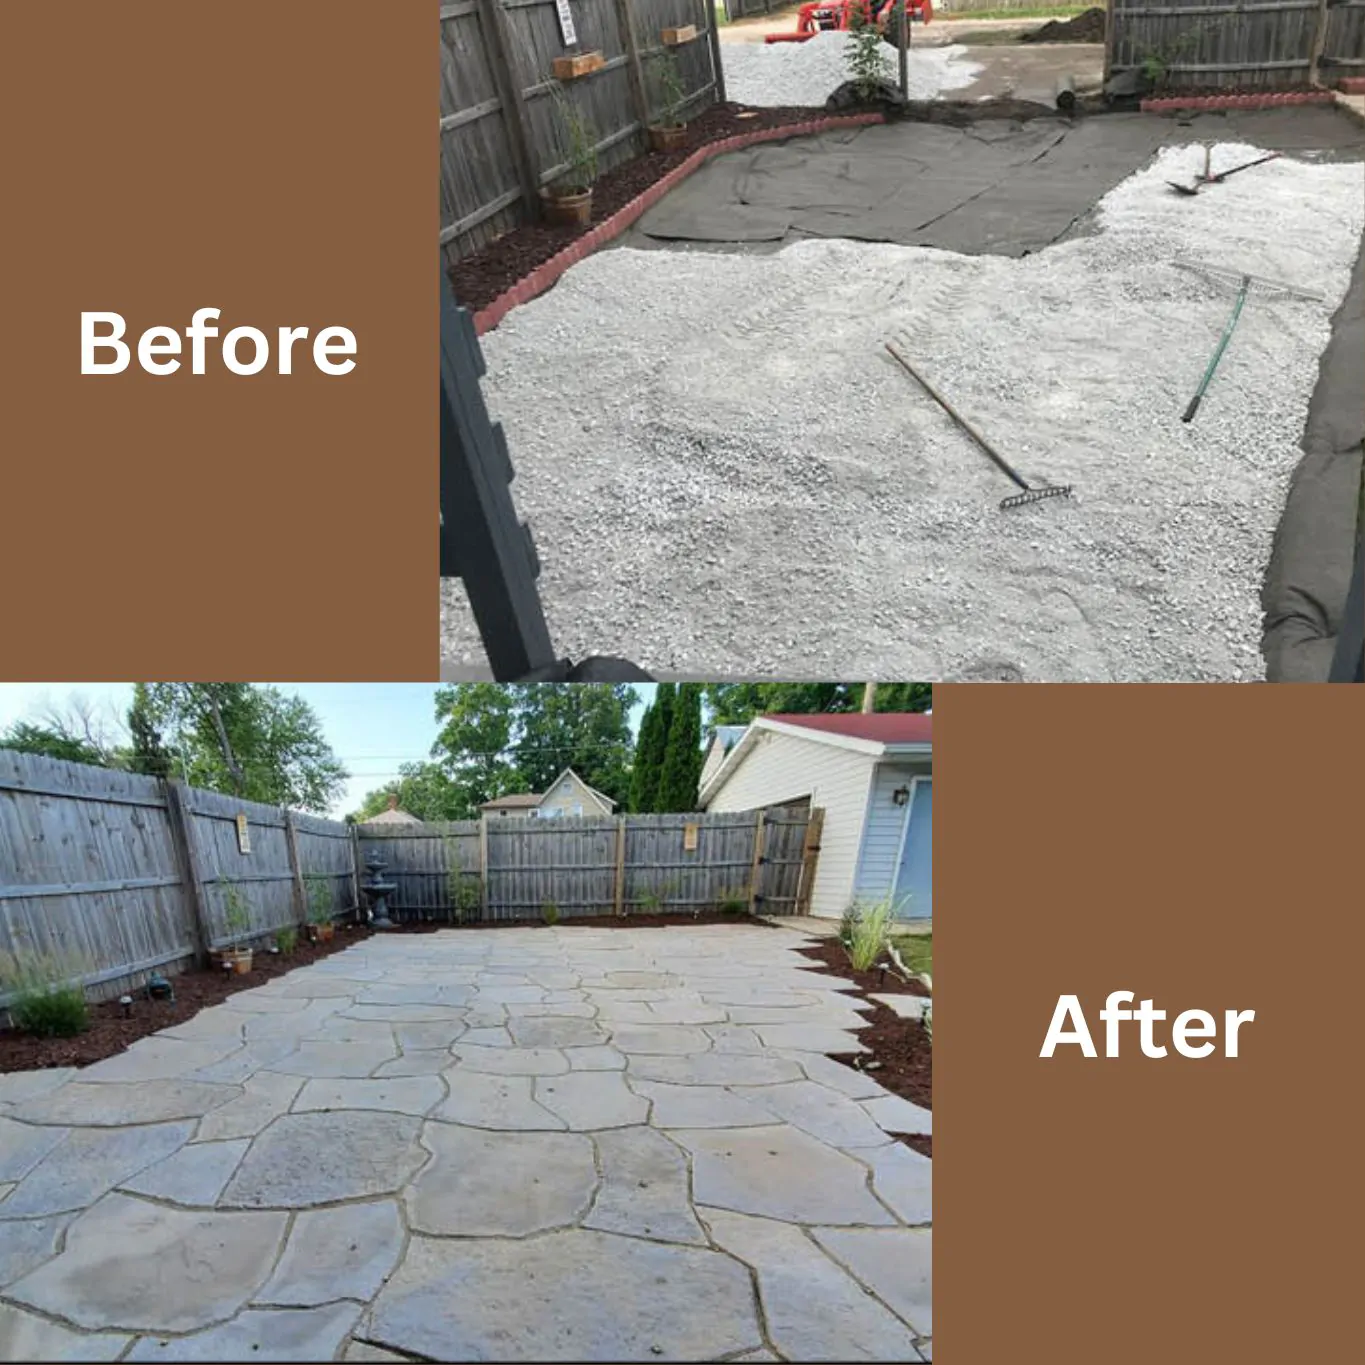 Patio and Hardscape Installation Service - All Pro Thornton Deck Builders